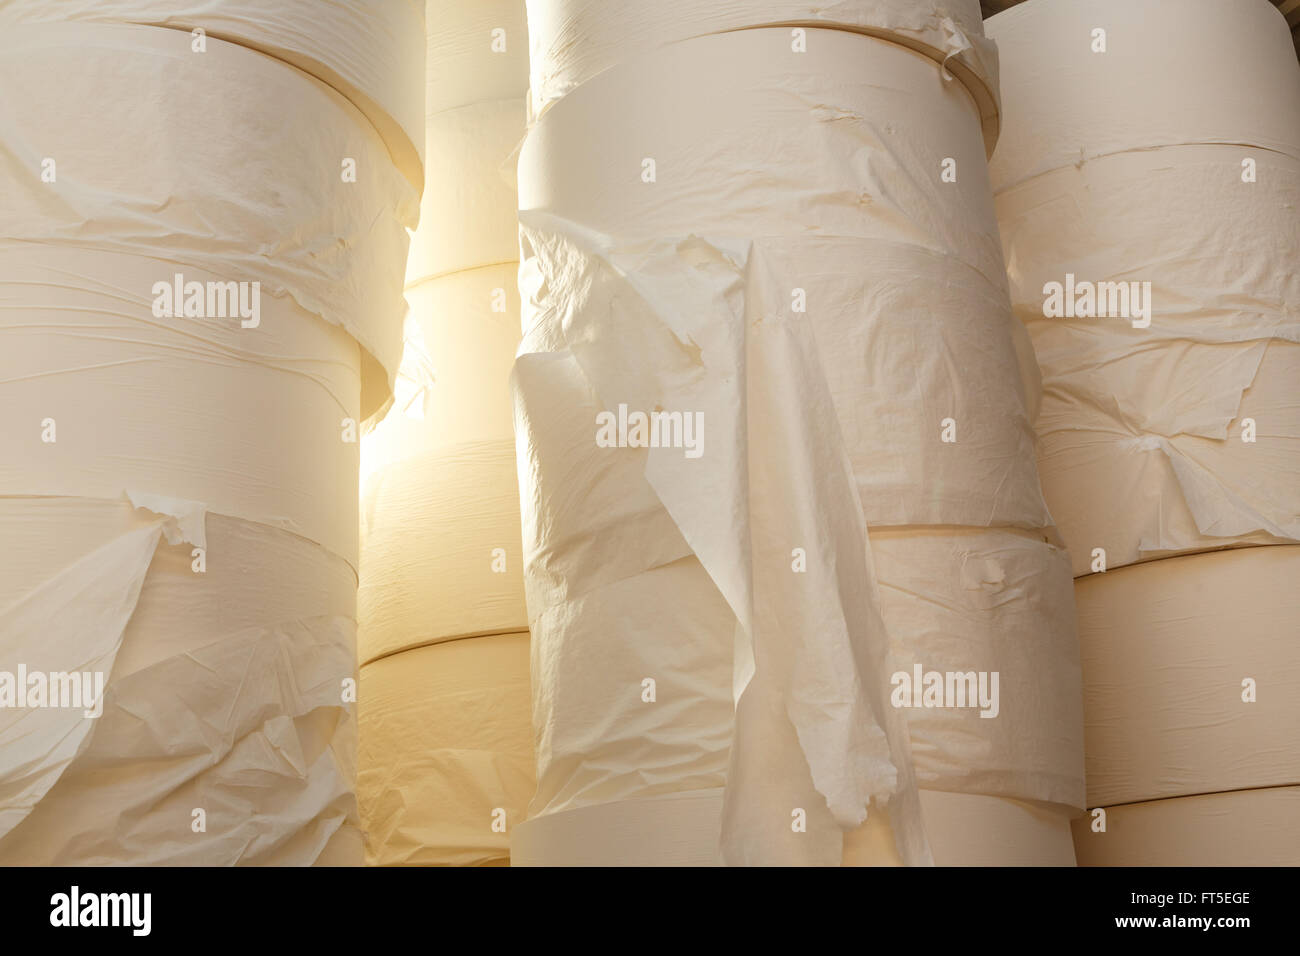 Toilet paper rolls in closeup as background Stock Photo